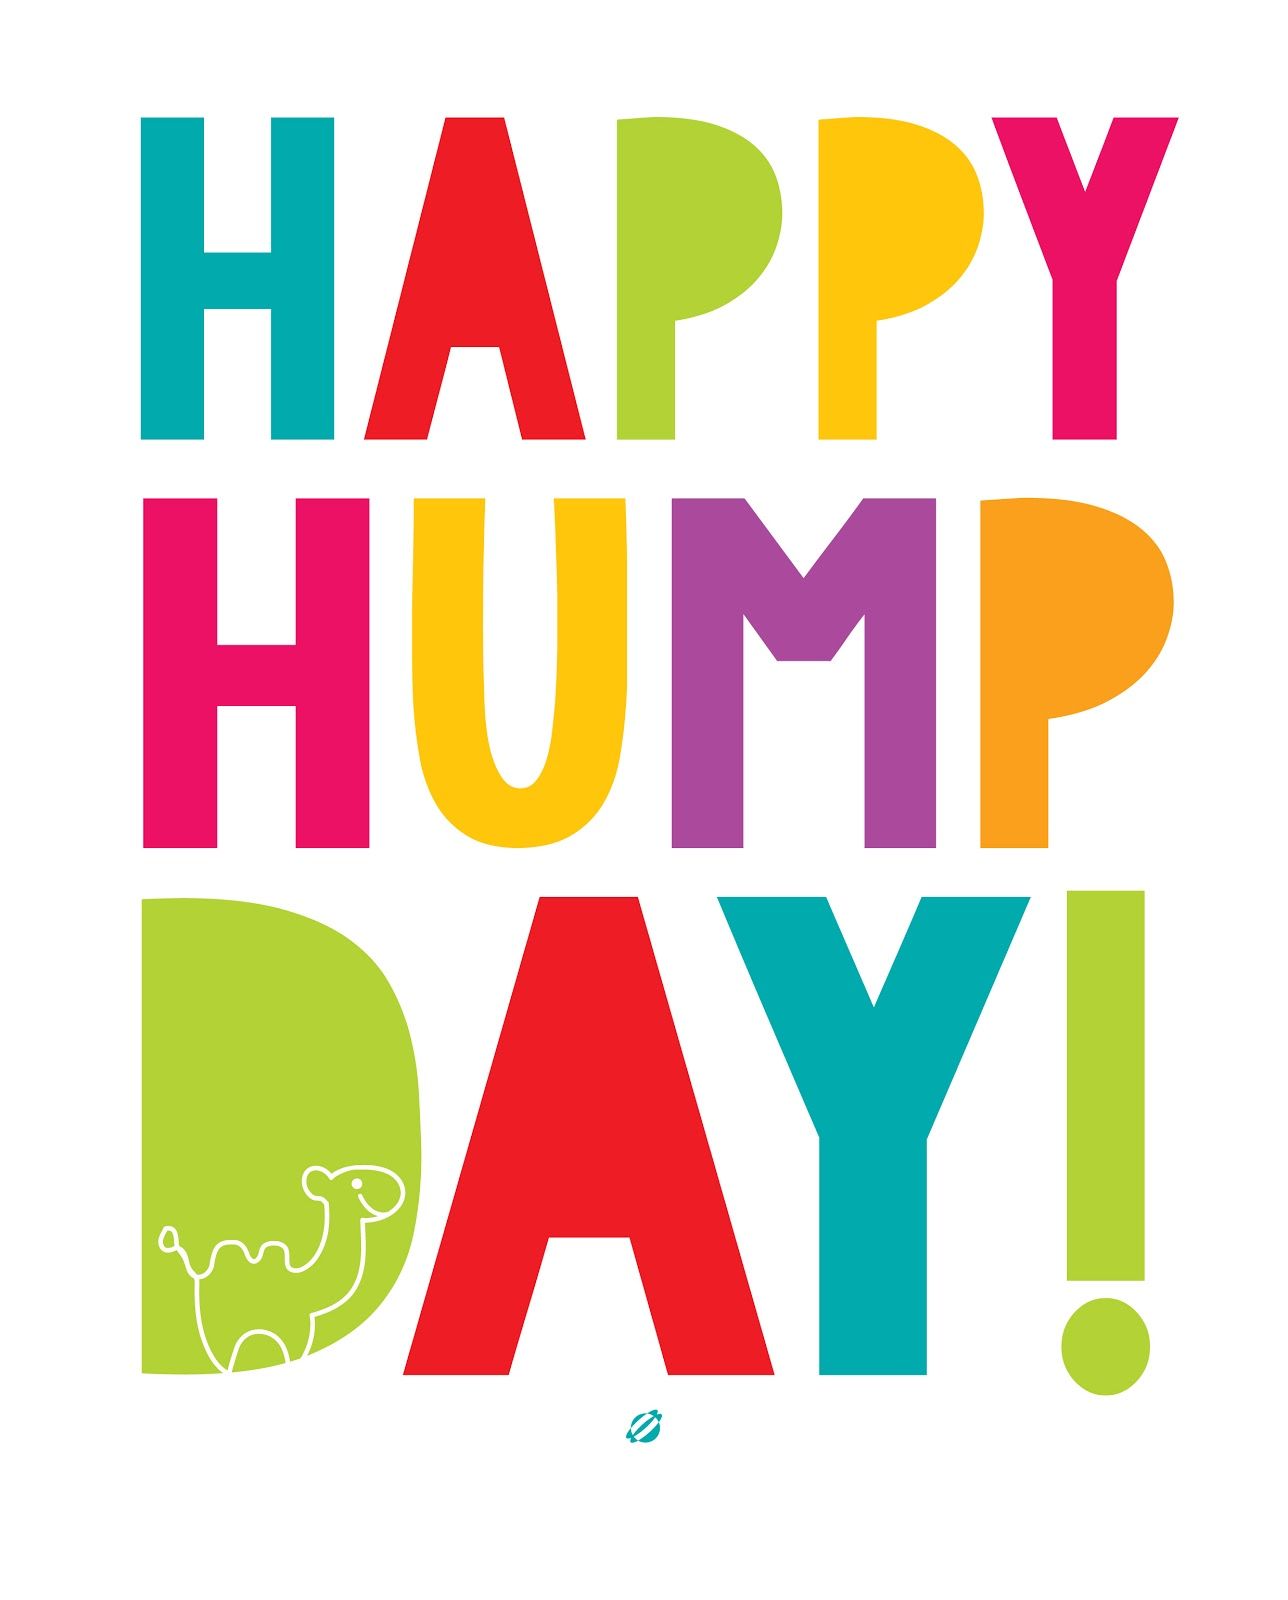 Happy Hump DAY!. Hump day quotes, Hump day humor, Weekday quotes